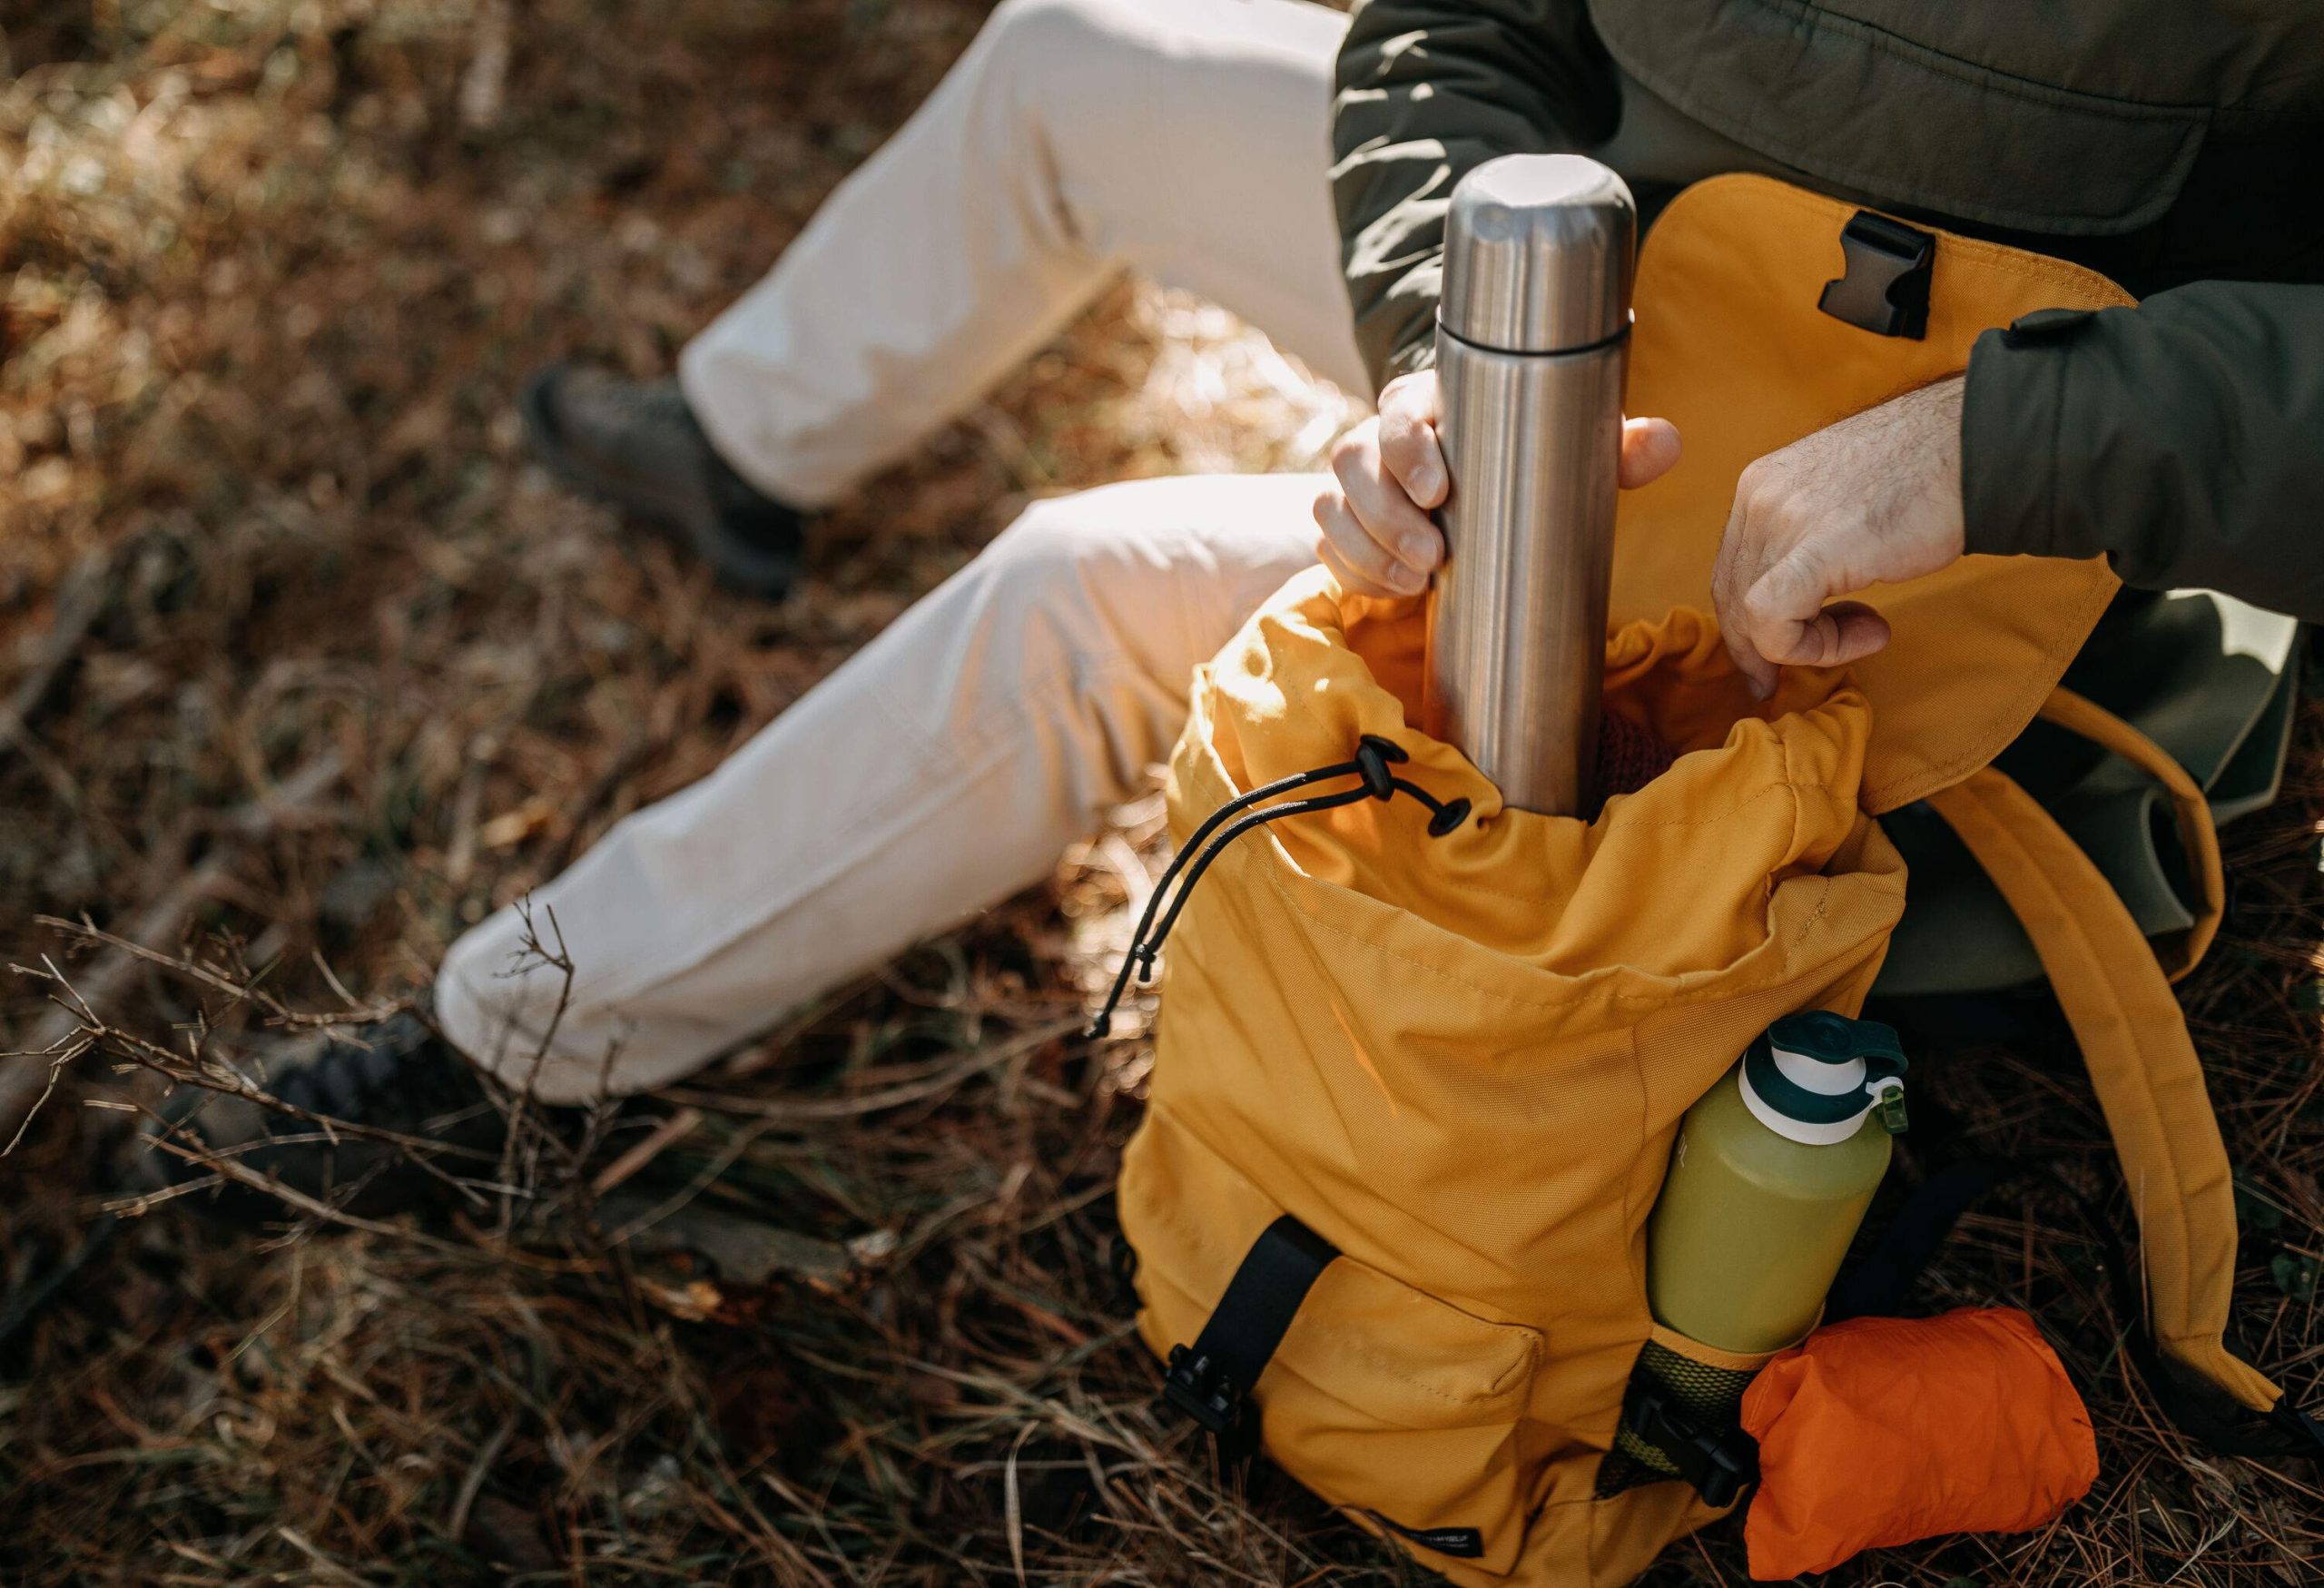 A man resting on the ground brings out a silver vacuum-insulated bottle from his yellow backpack.